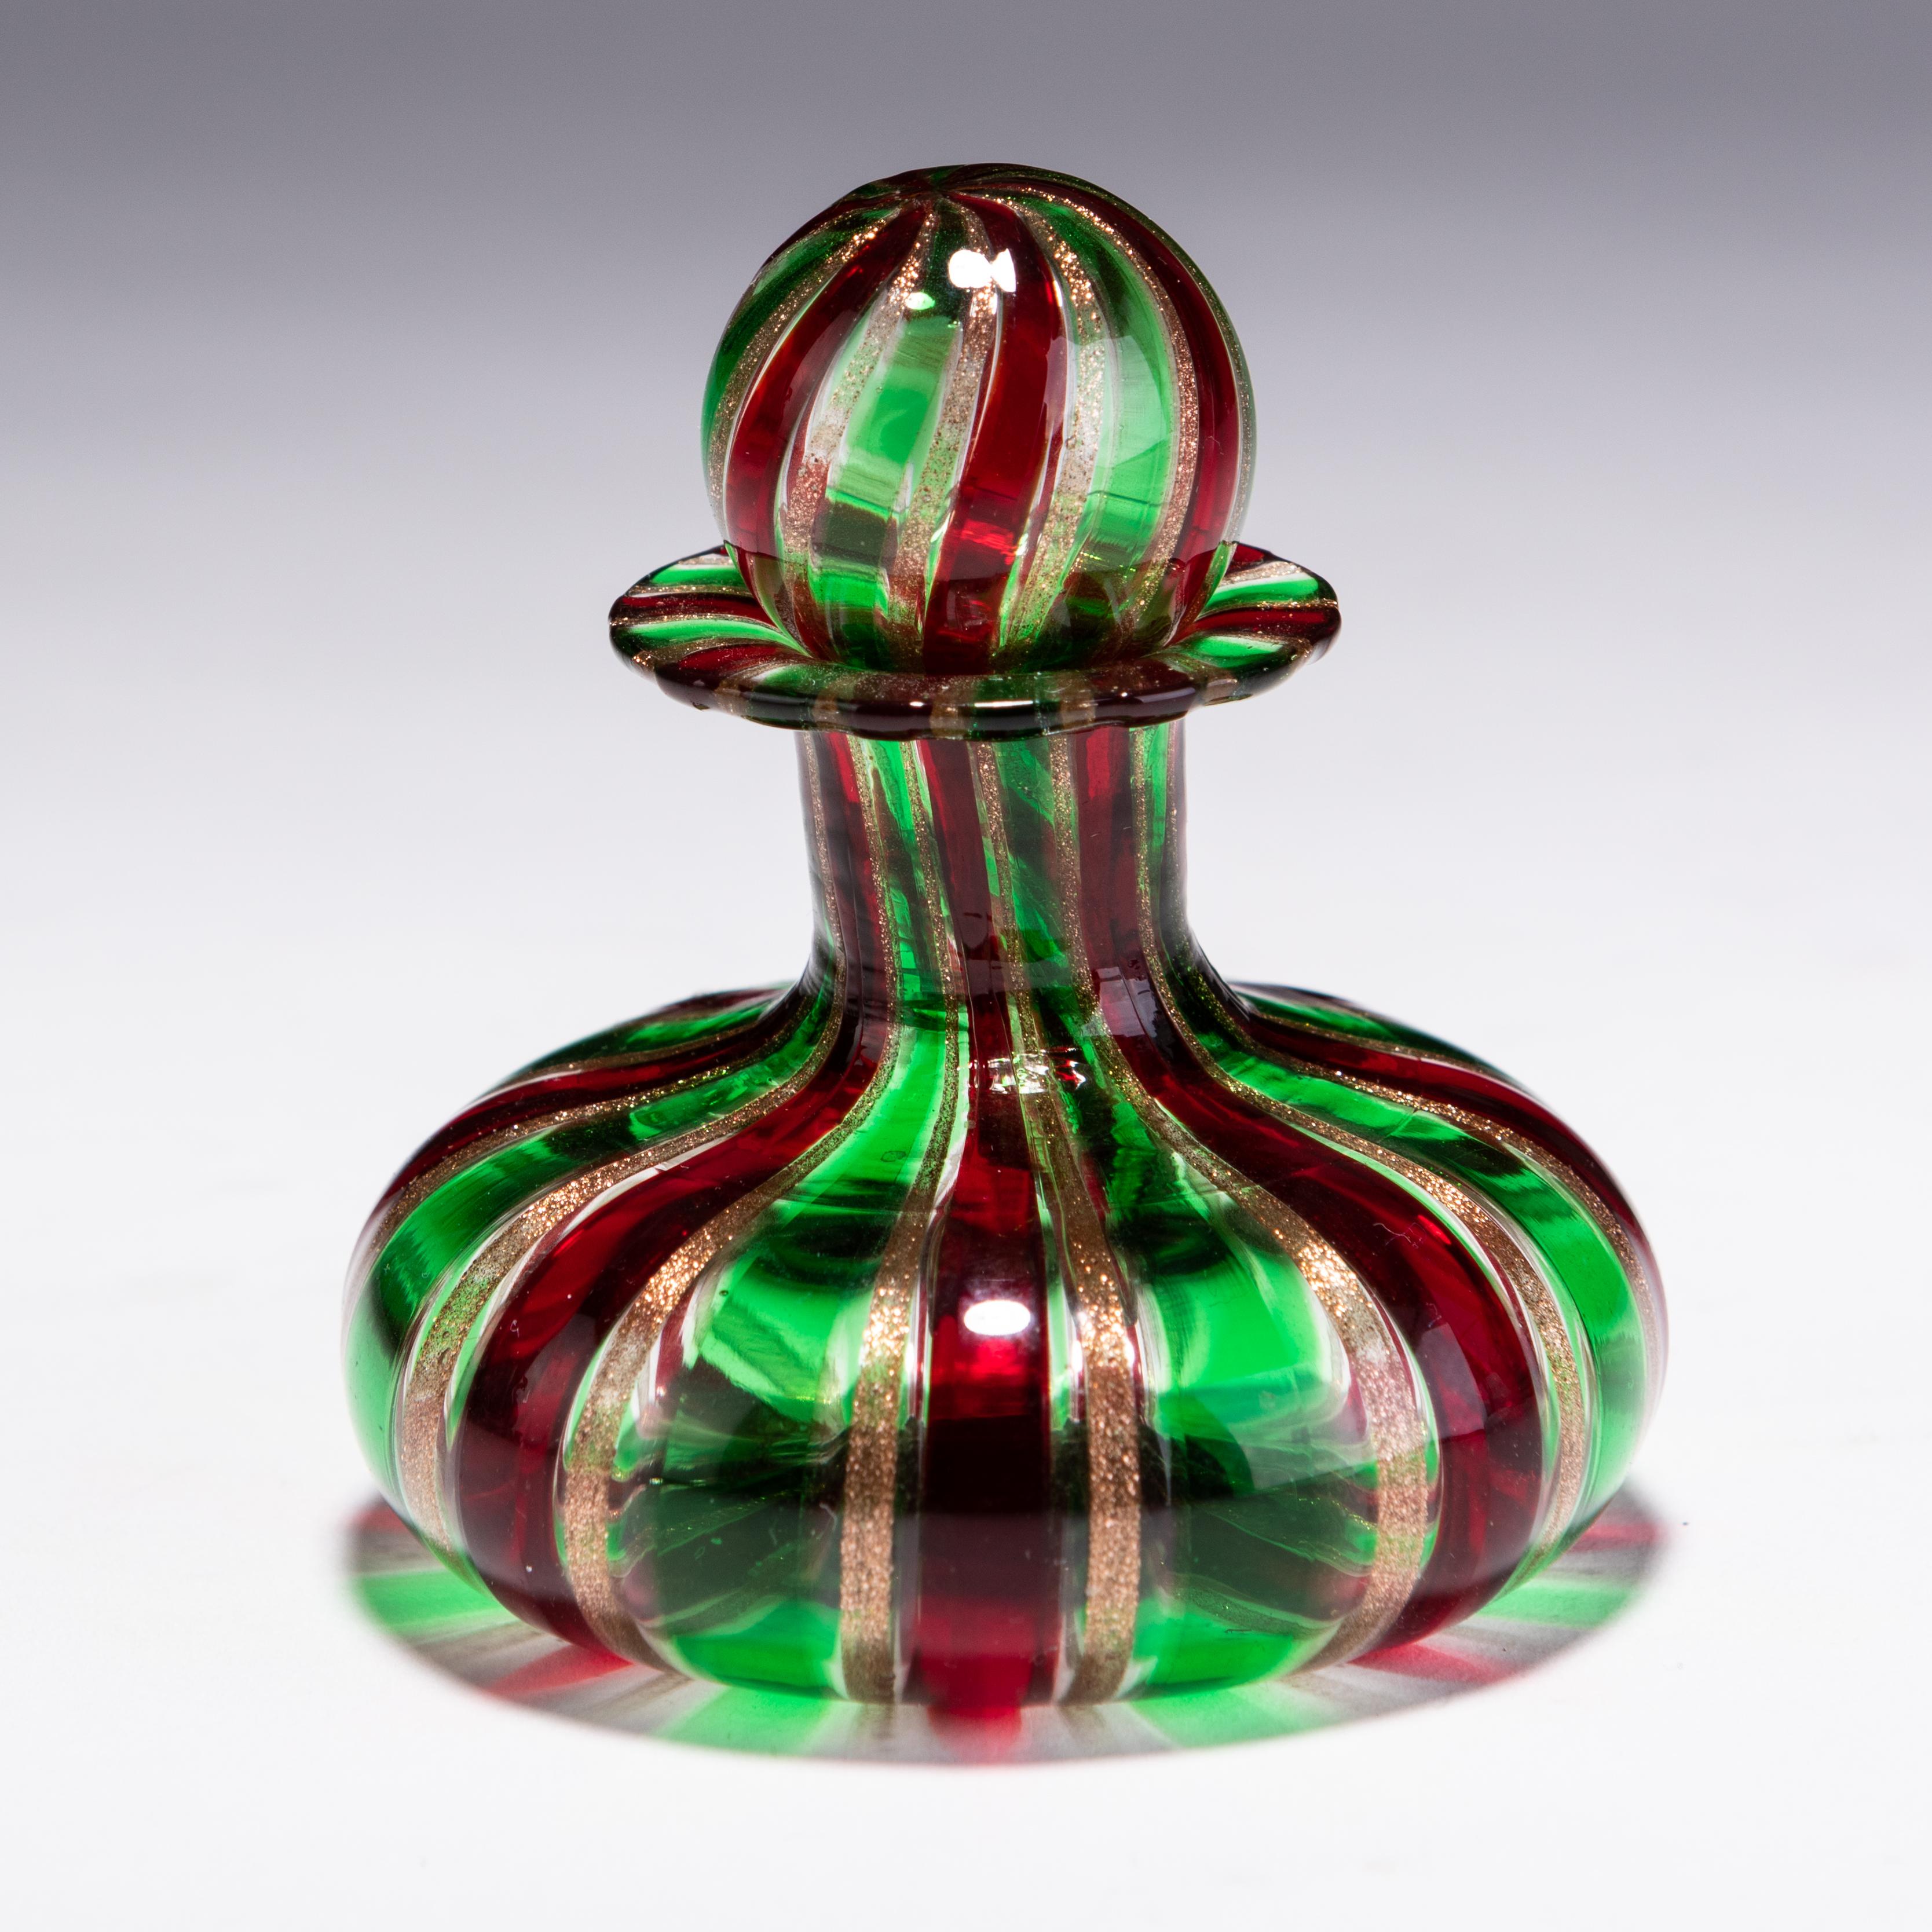 Italian Murano Venetian Glass Ruby & Emerald Perfume Scent Bottle
Very good condition
From a private collection
Free international shipping